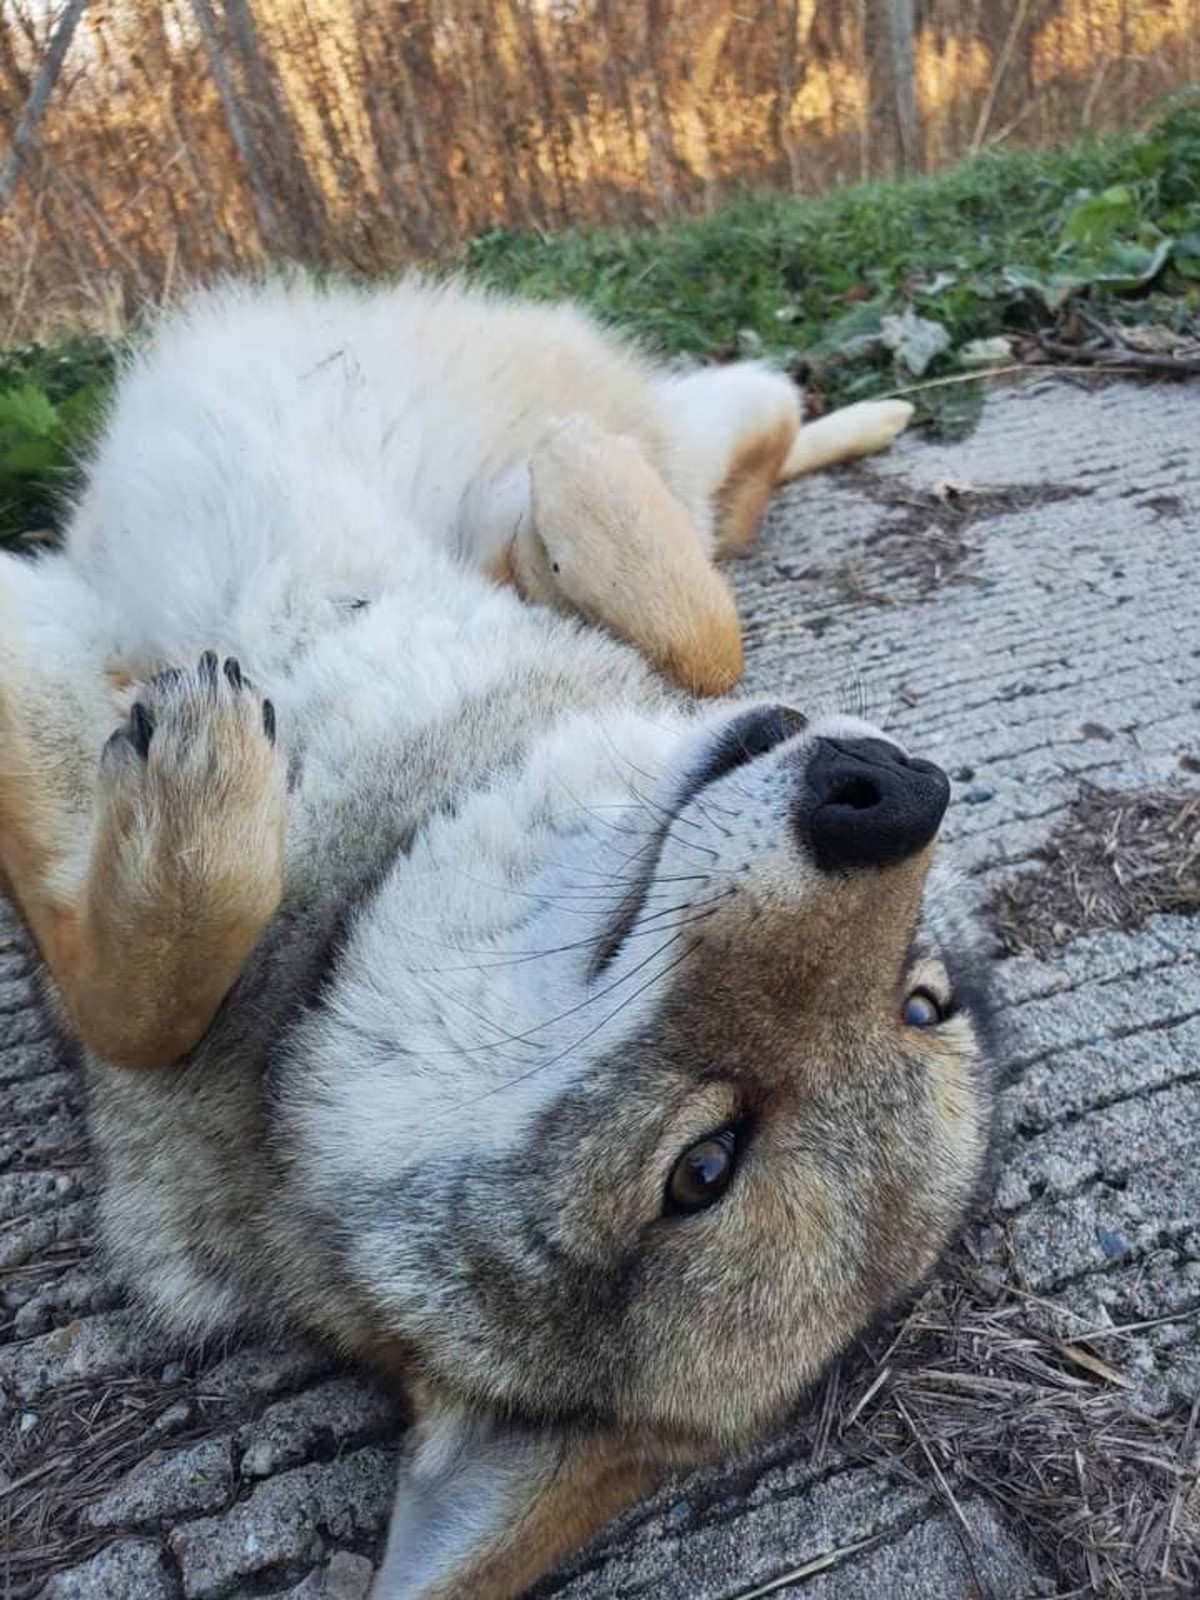 Dakota the Coyote. join list: RescueCritters (53 subs)Mention History Dakota the Coyote is a resident of SaveAFox Rescue believe it or not. He was raised in cap